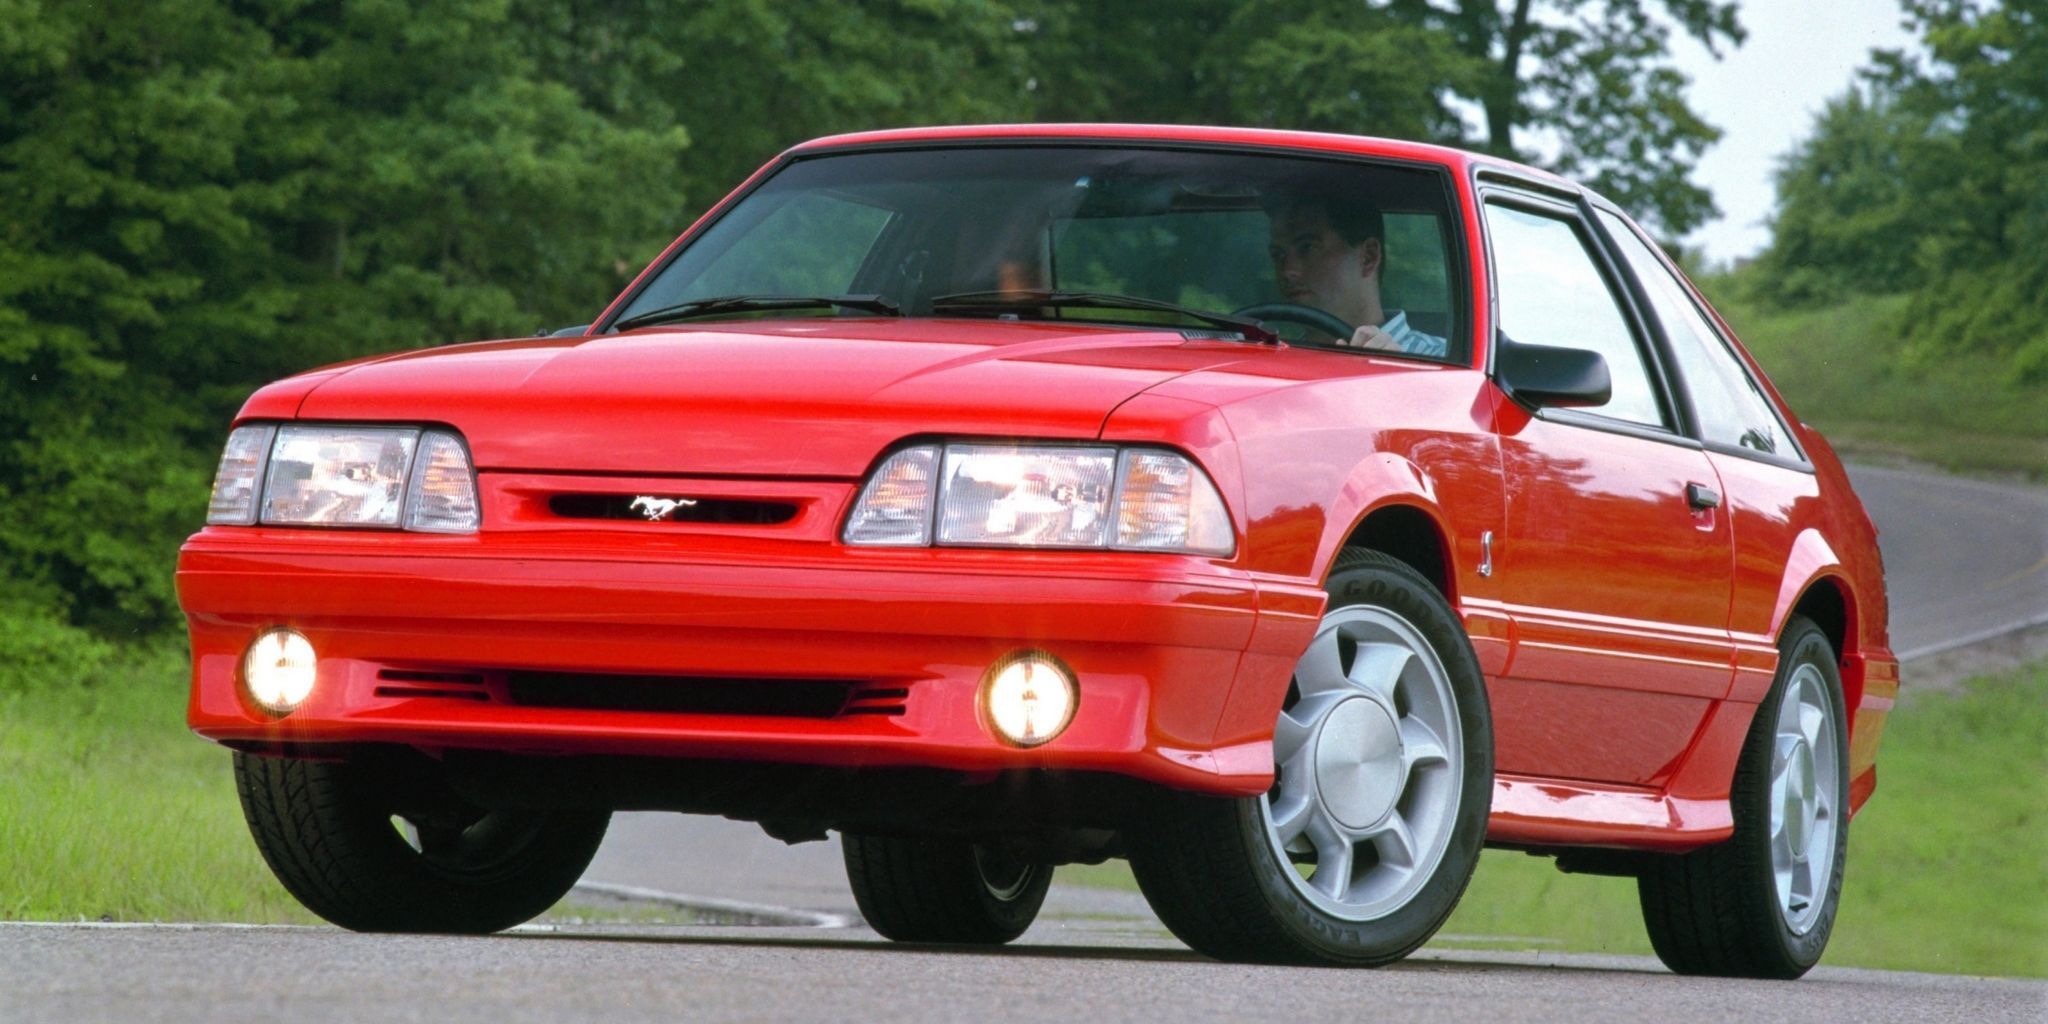 1993 Ford SVT Mustang Cobra on the road